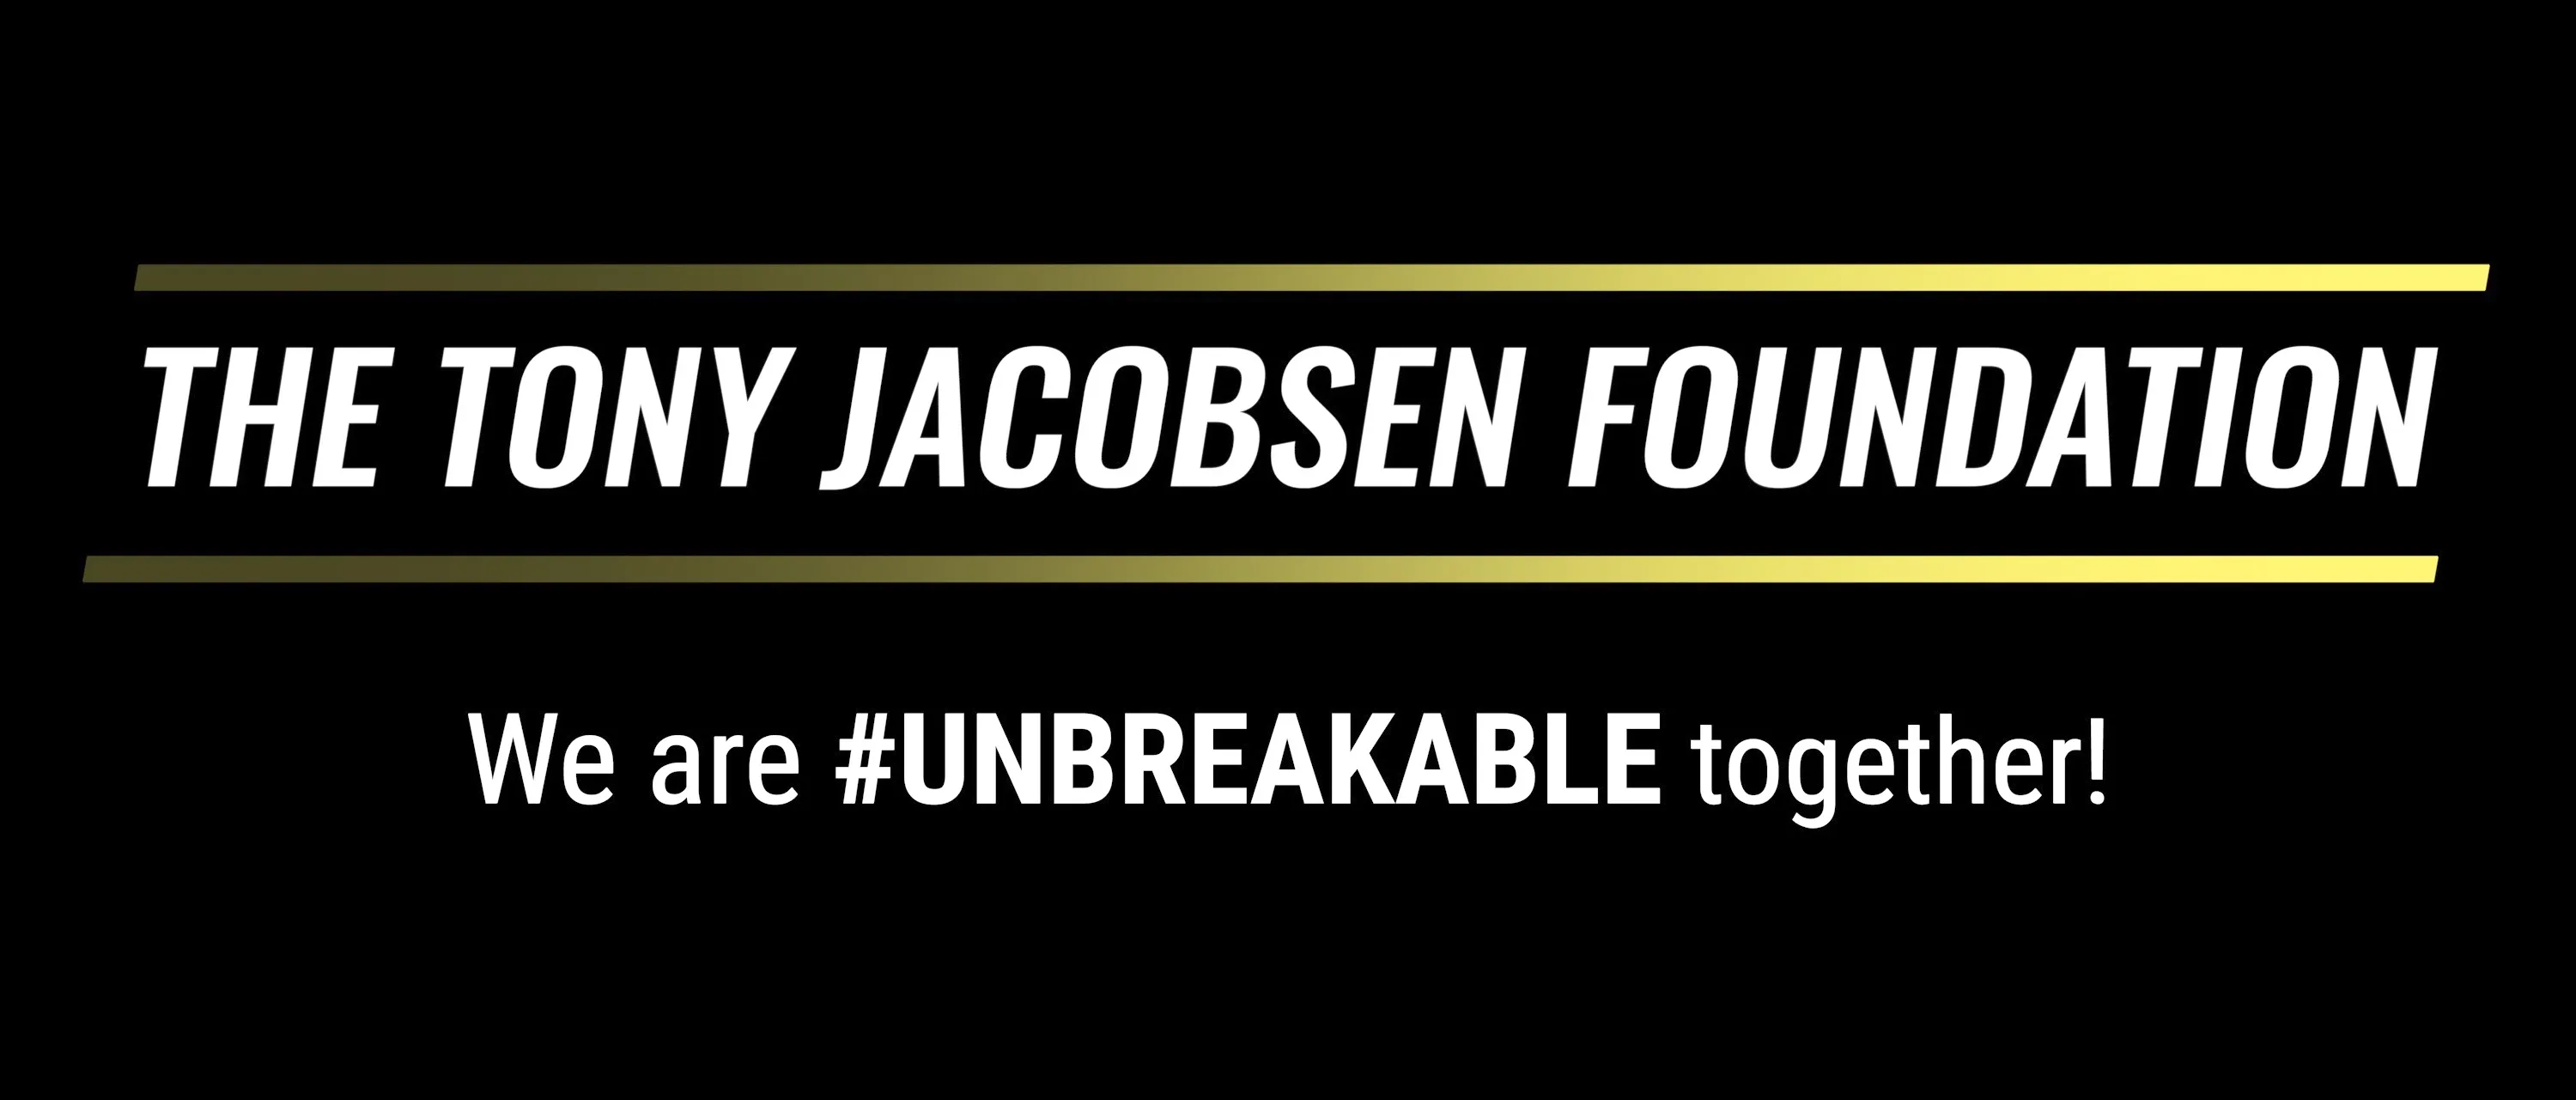 The Tony Jacobsen Foundation word logo and the words We Are #UNBREAKABLE under